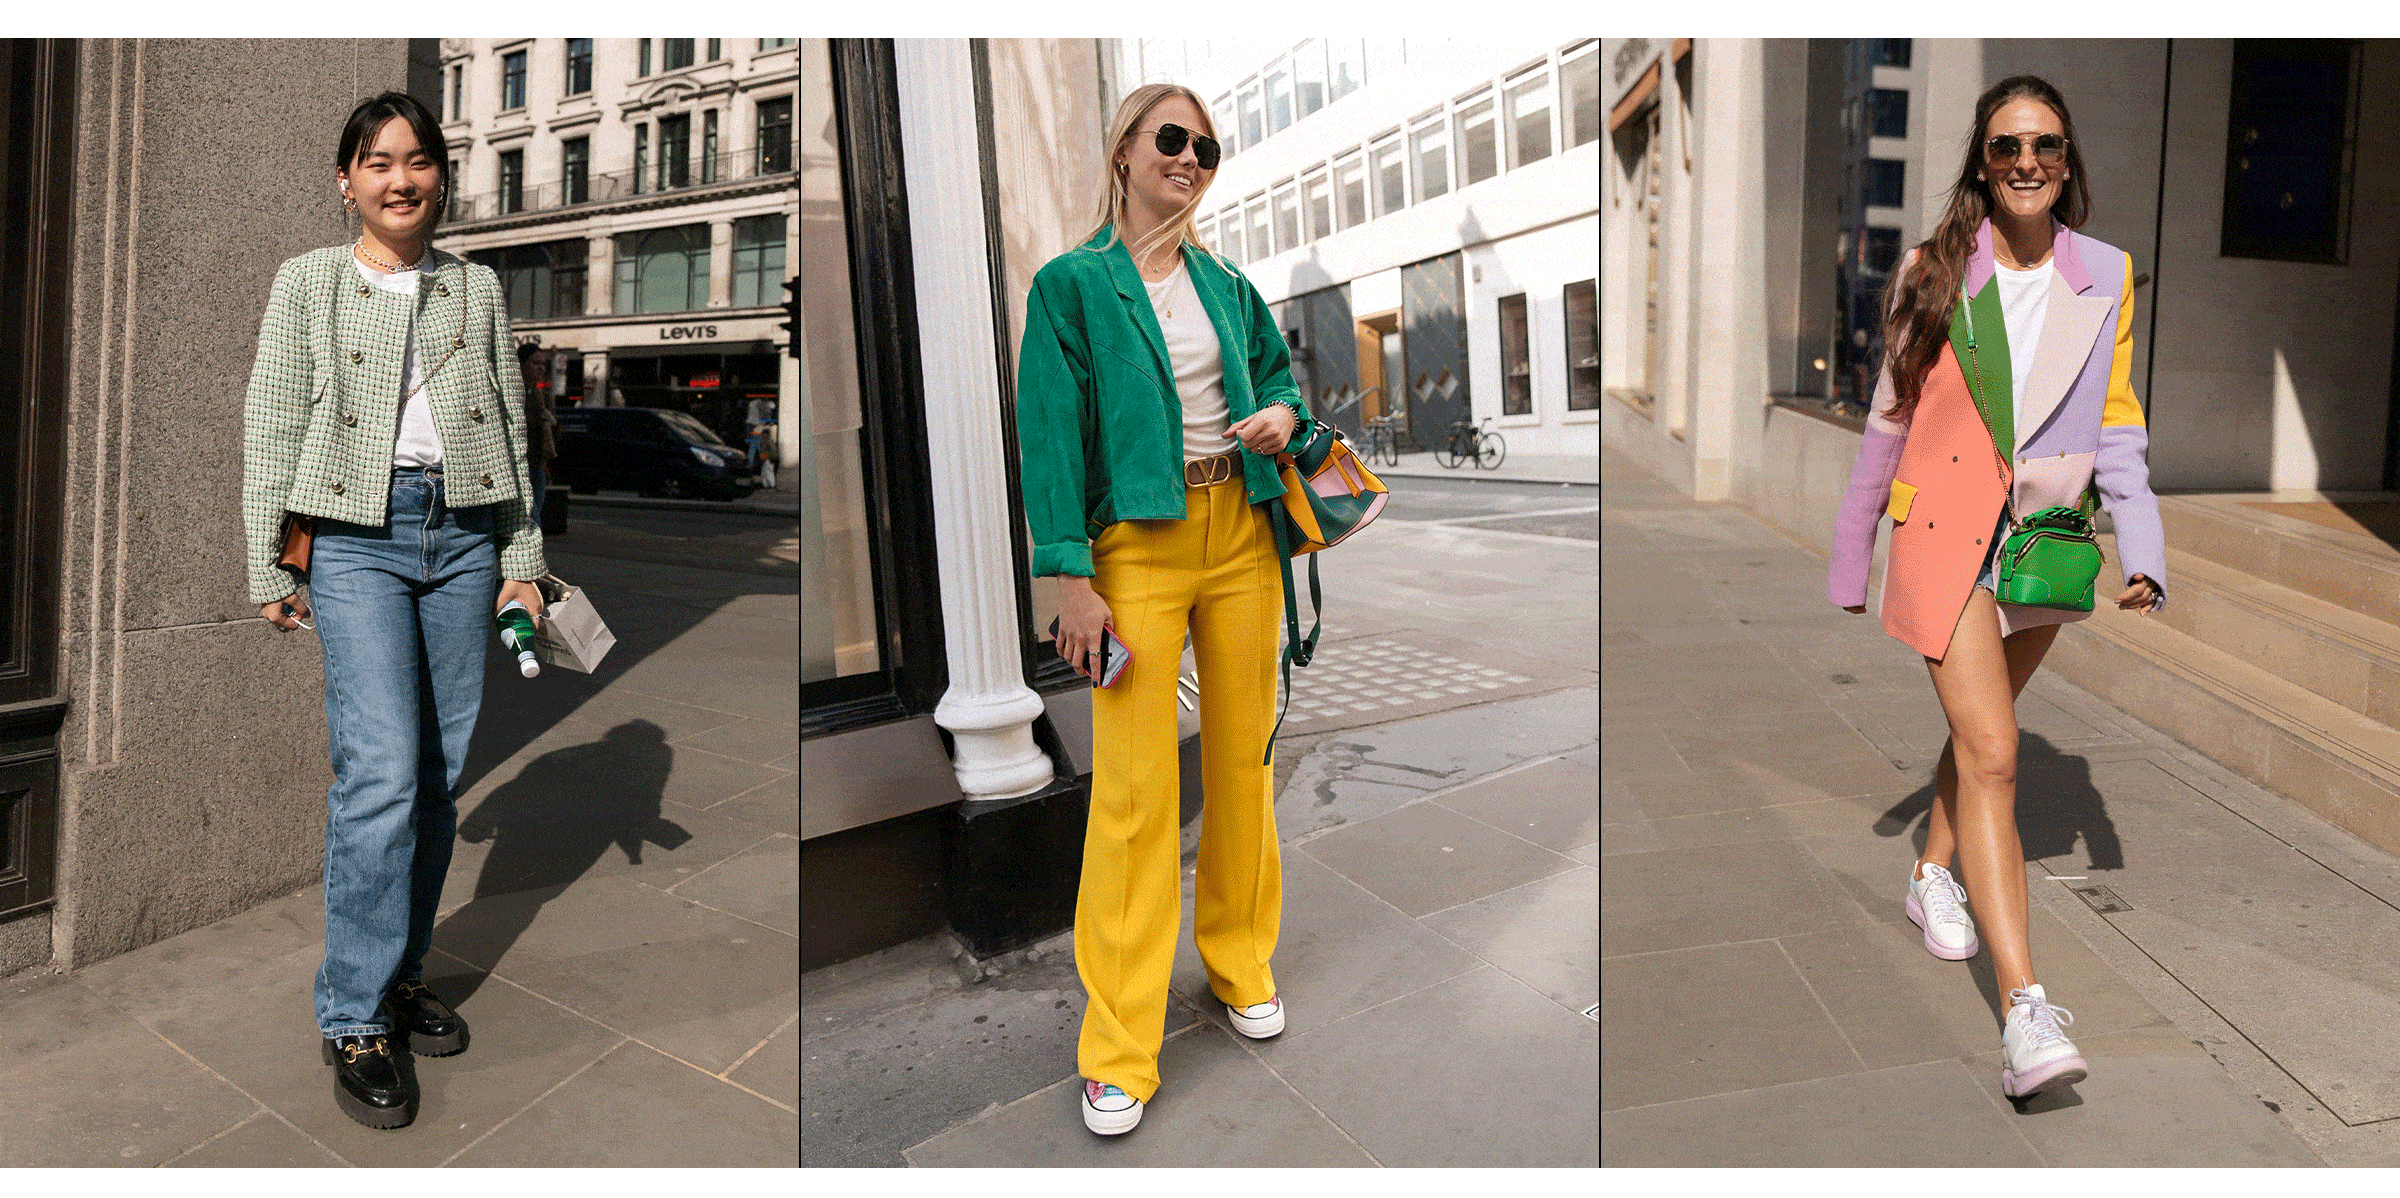 We Went Street Style–Spotting in London, and These 10 Outfits Wowed Us